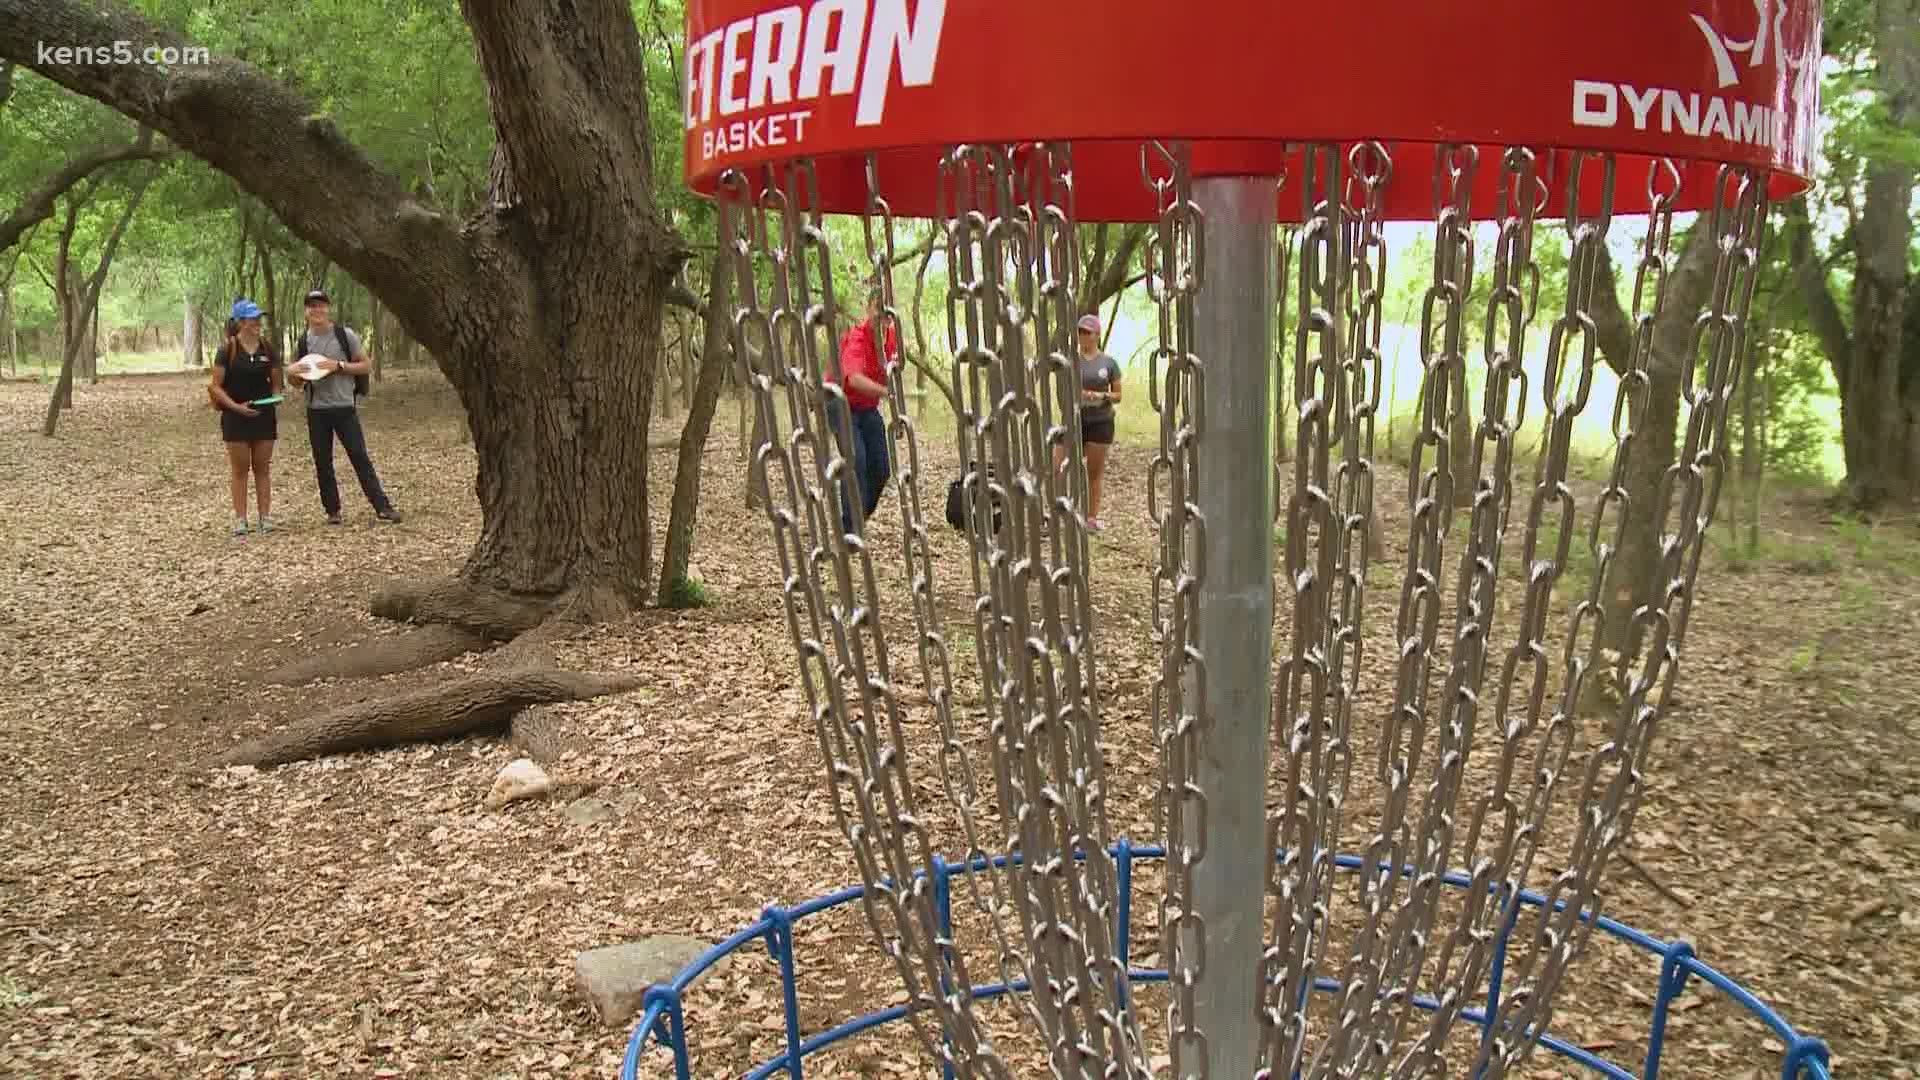 This week on Texas Outdoors, KENS 5's Barry Davis works on his golf game, but not the kind you think.